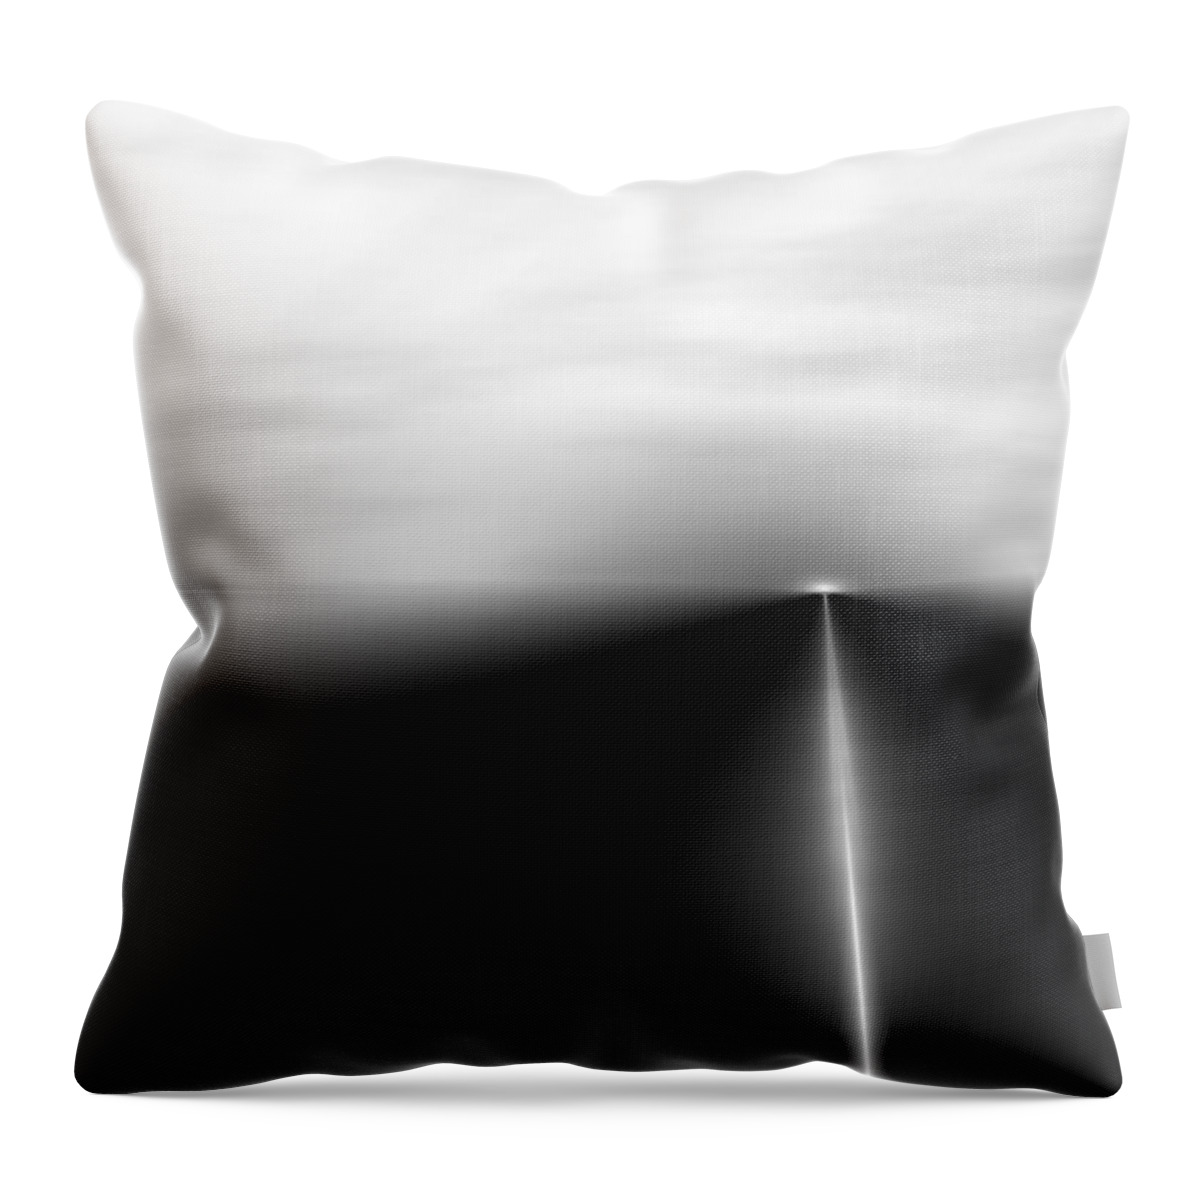 Vic Eberly Throw Pillow featuring the digital art On The Road by Vic Eberly